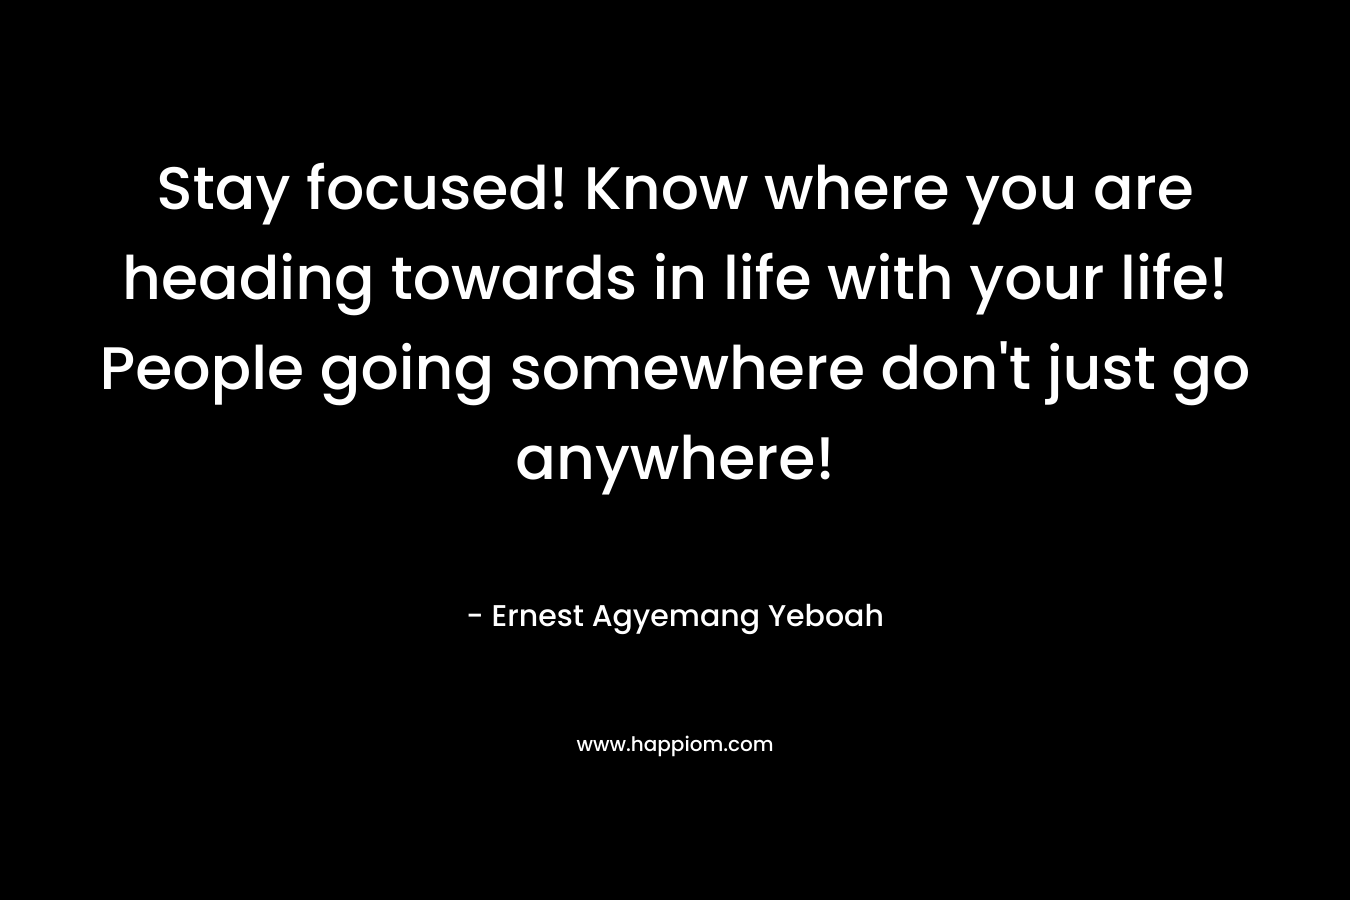 Stay focused! Know where you are heading towards in life with your life! People going somewhere don’t just go anywhere! – Ernest Agyemang Yeboah